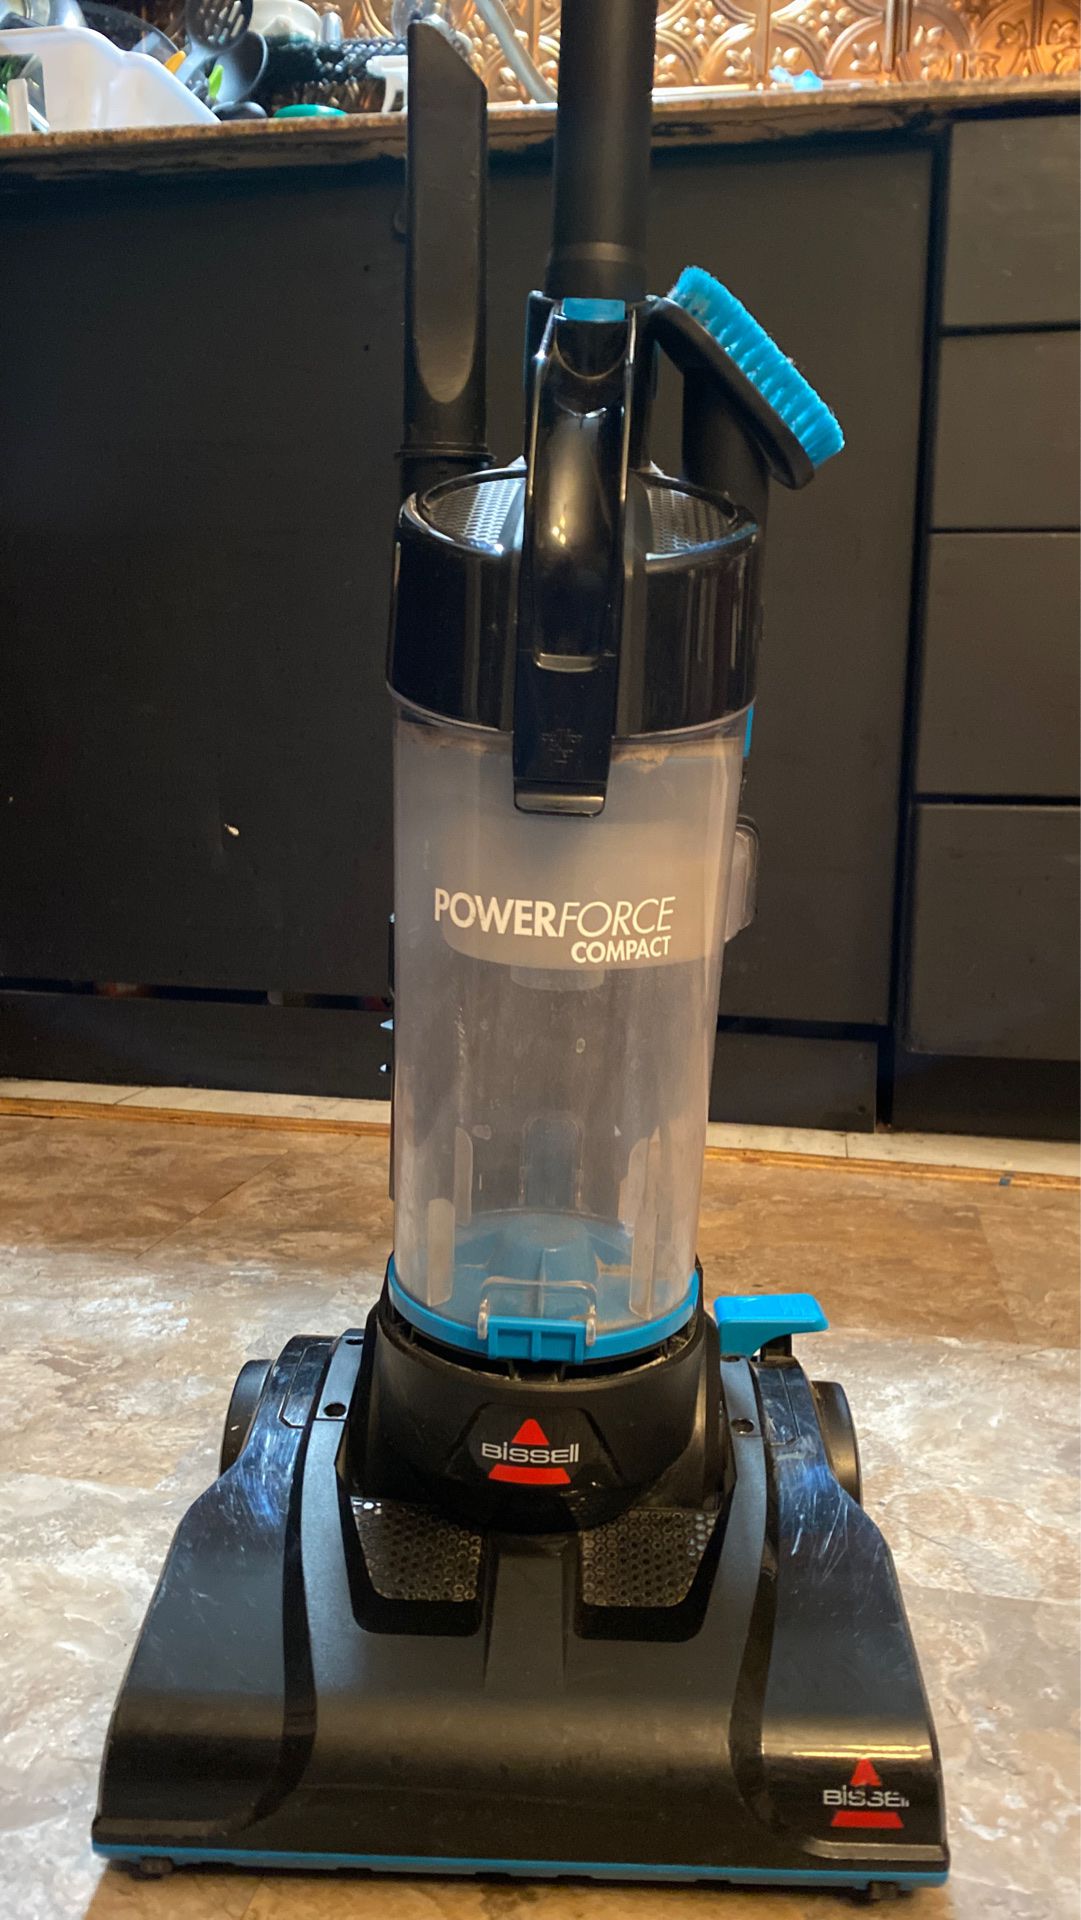 Bissell powerforce compact vacuum